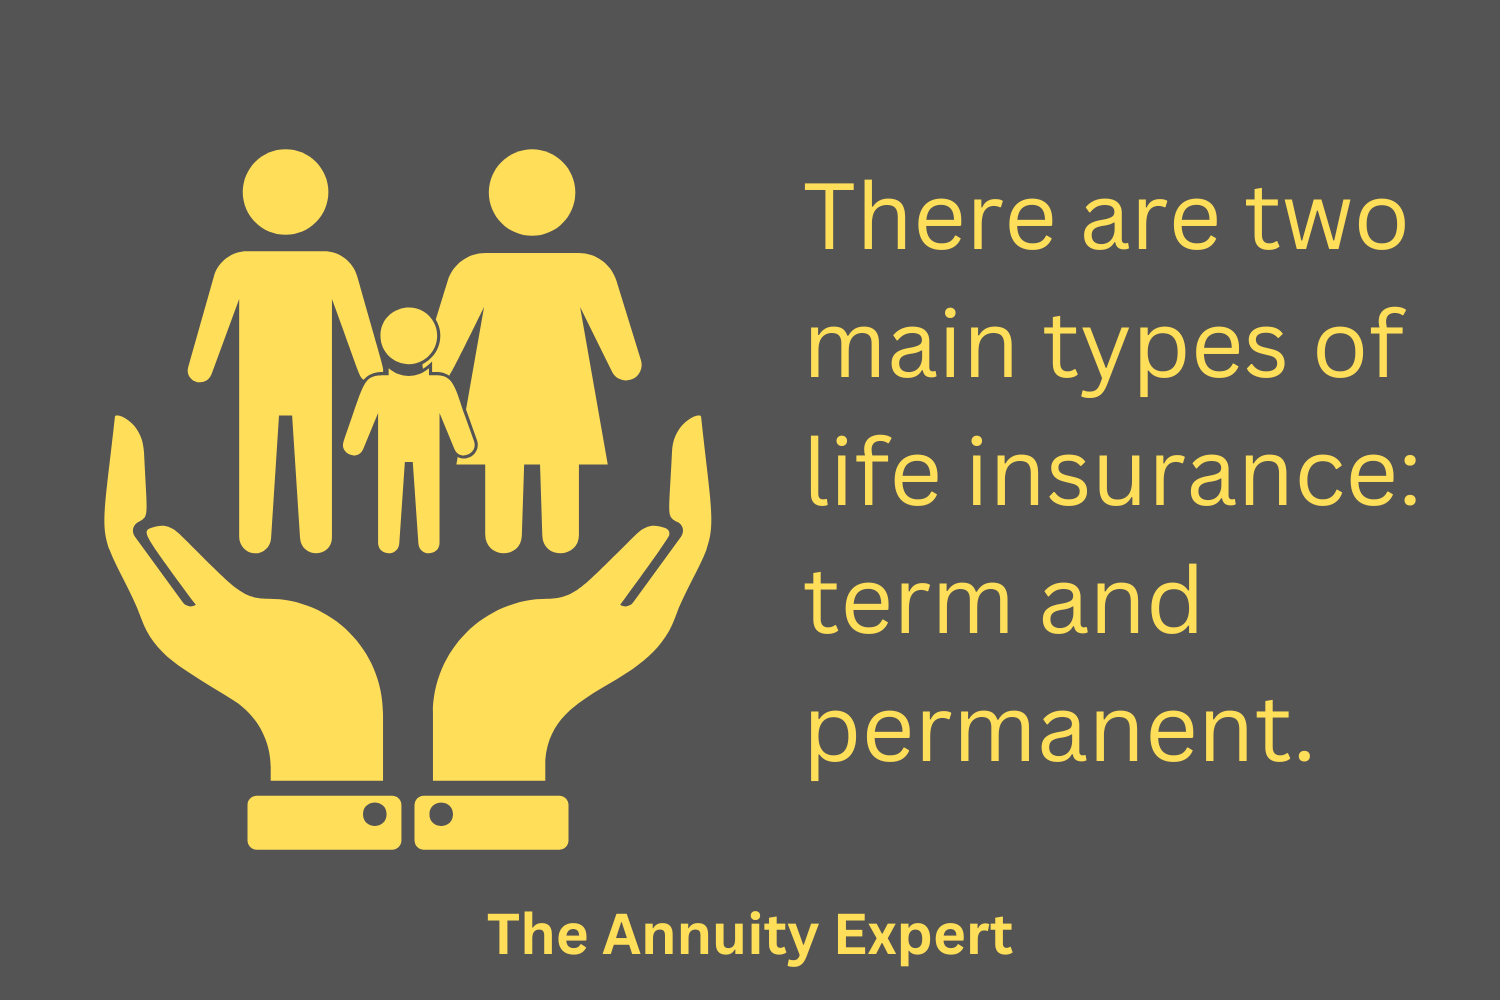 What Are The Two Main Types Of Life Insurance?